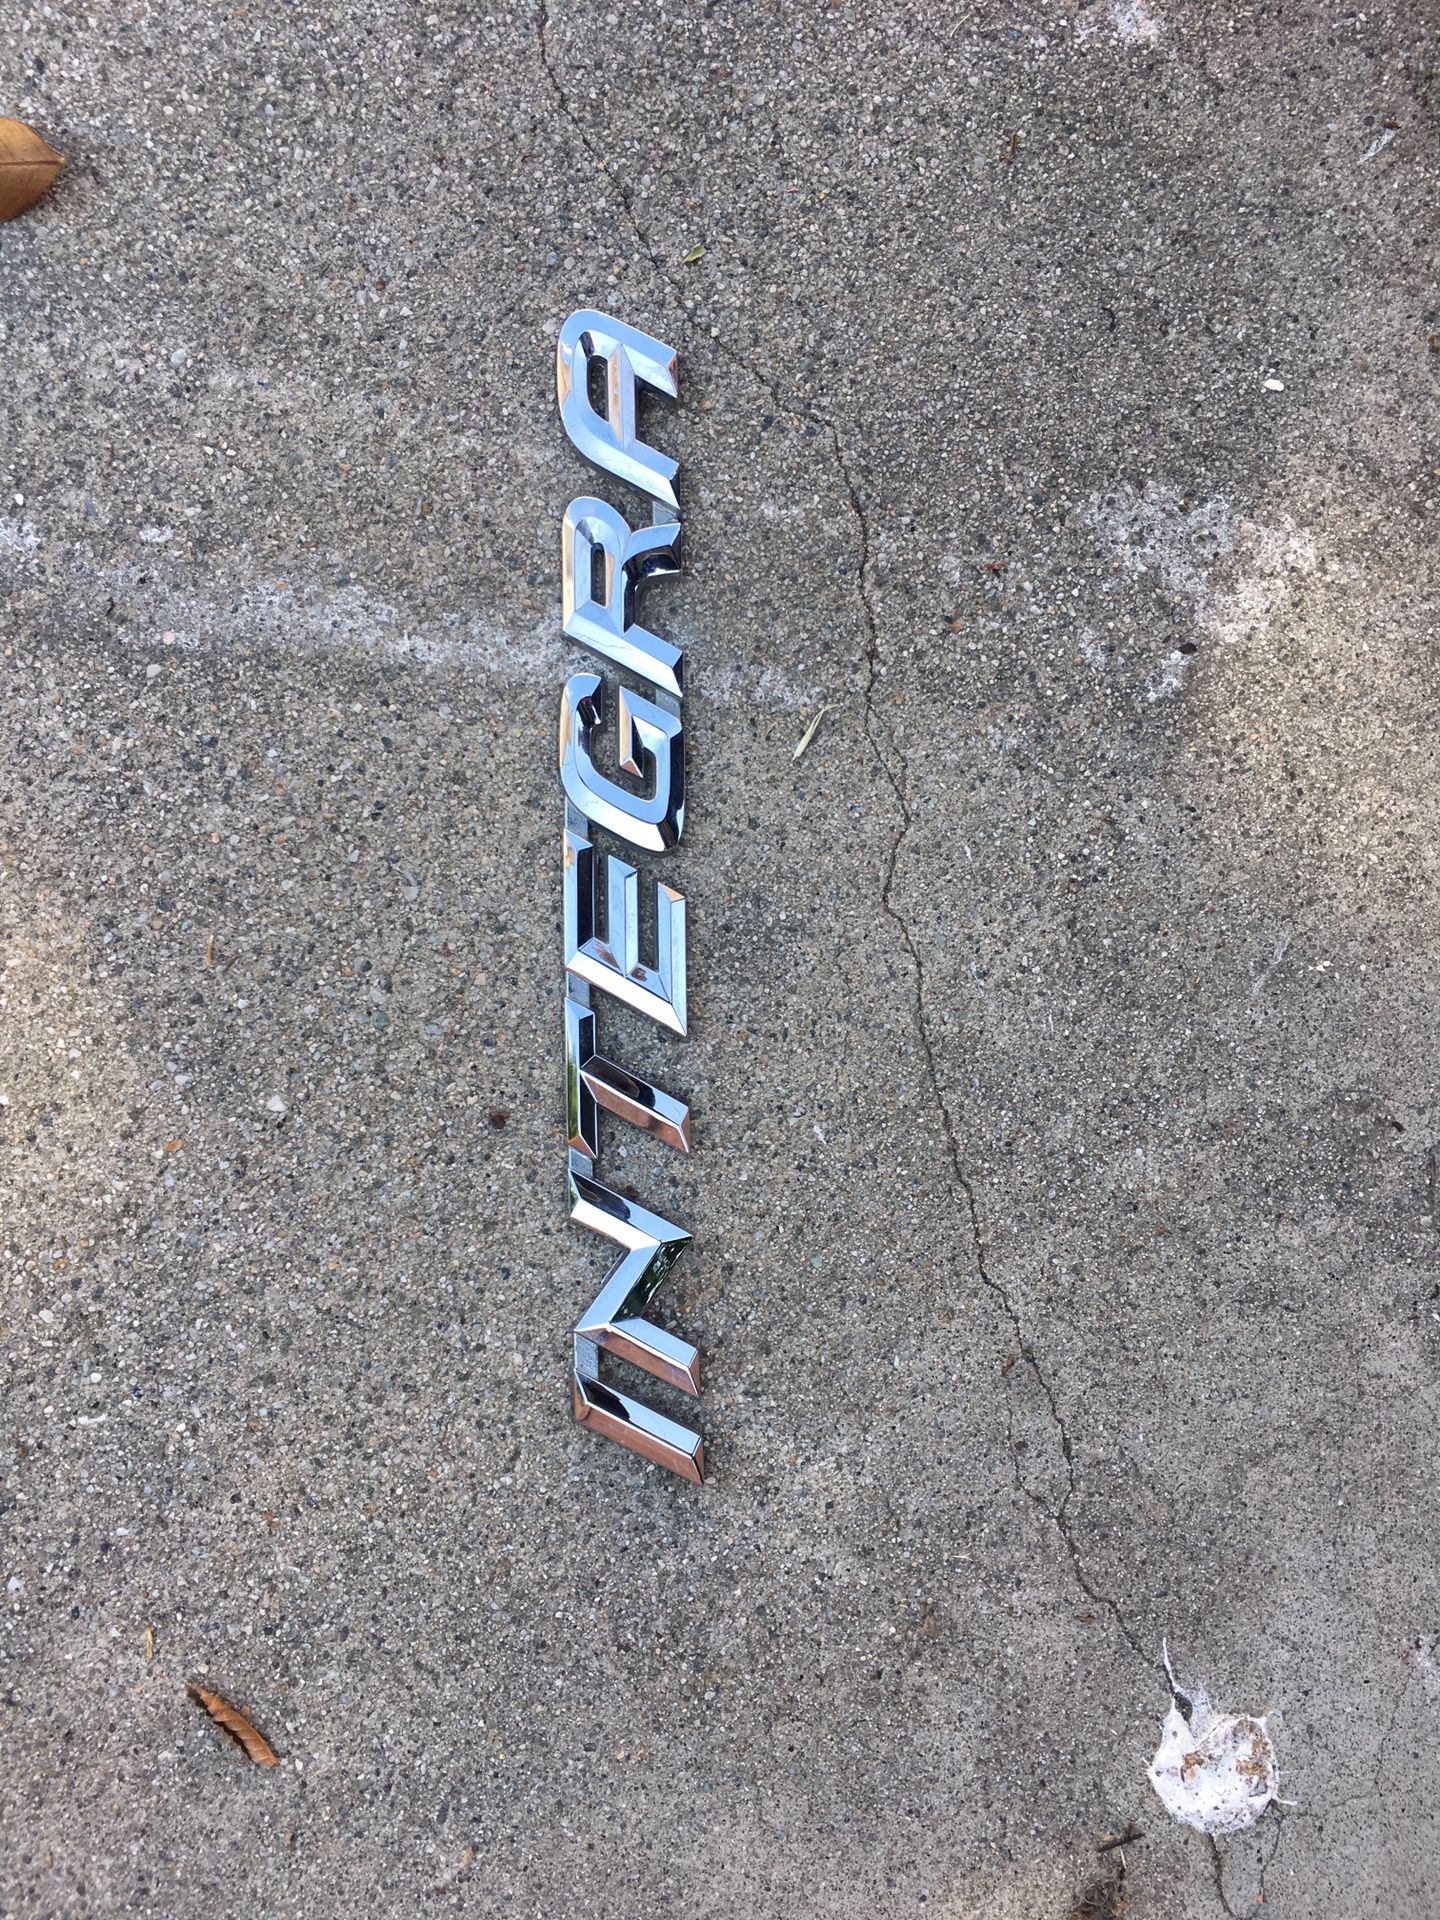 2002-2006 Acura Rsx Type R/Integra Badge , Asking $45.00 Firm